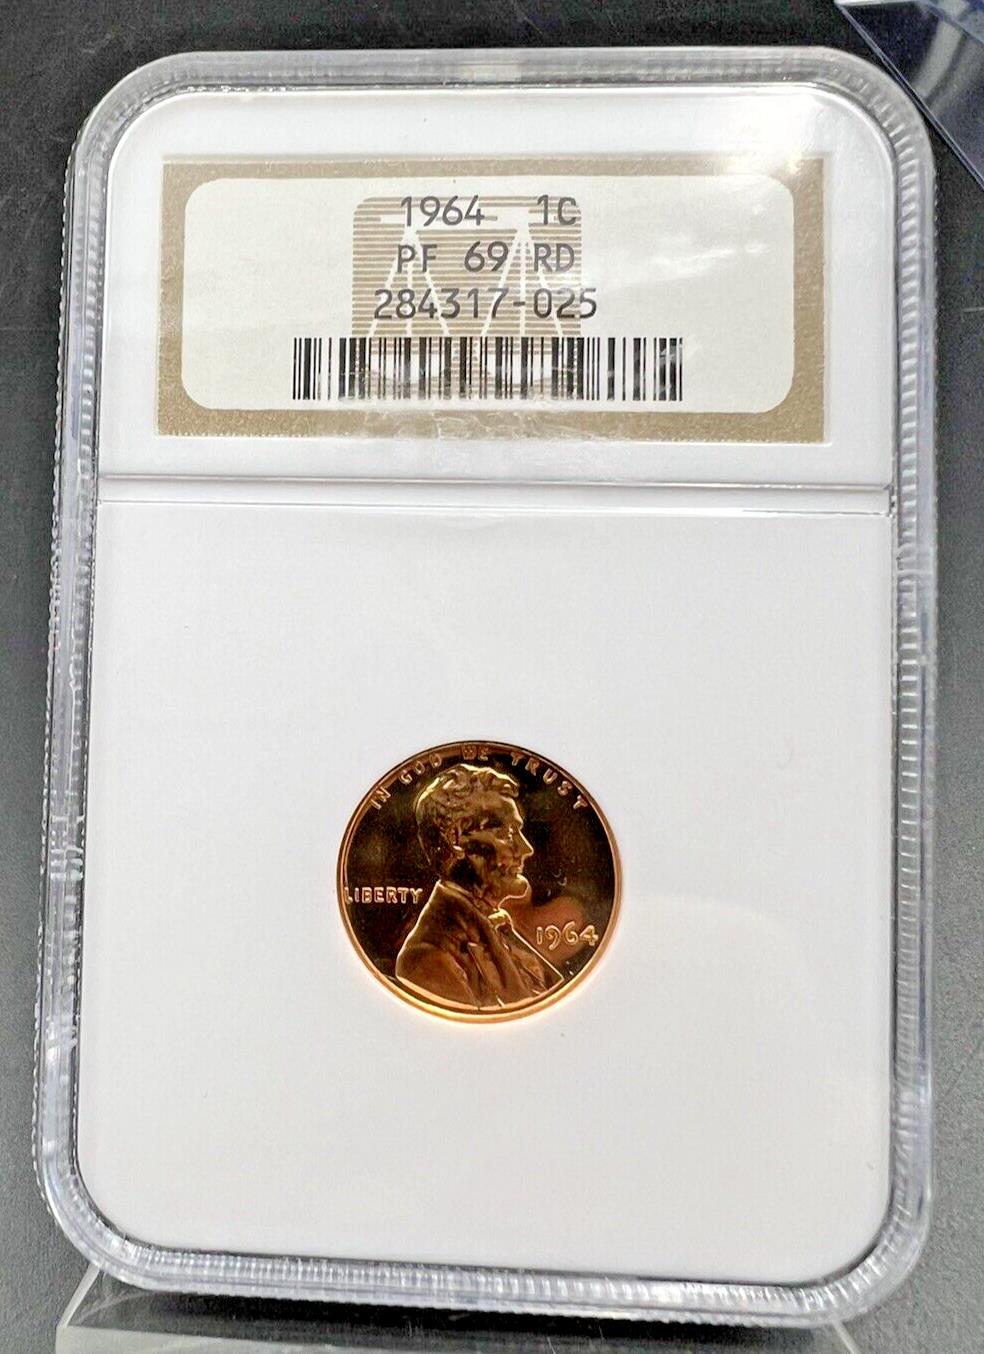 1964 P Lincoln Memorial Cent Penny Coin NGC PF69 RD Gem BU Certified